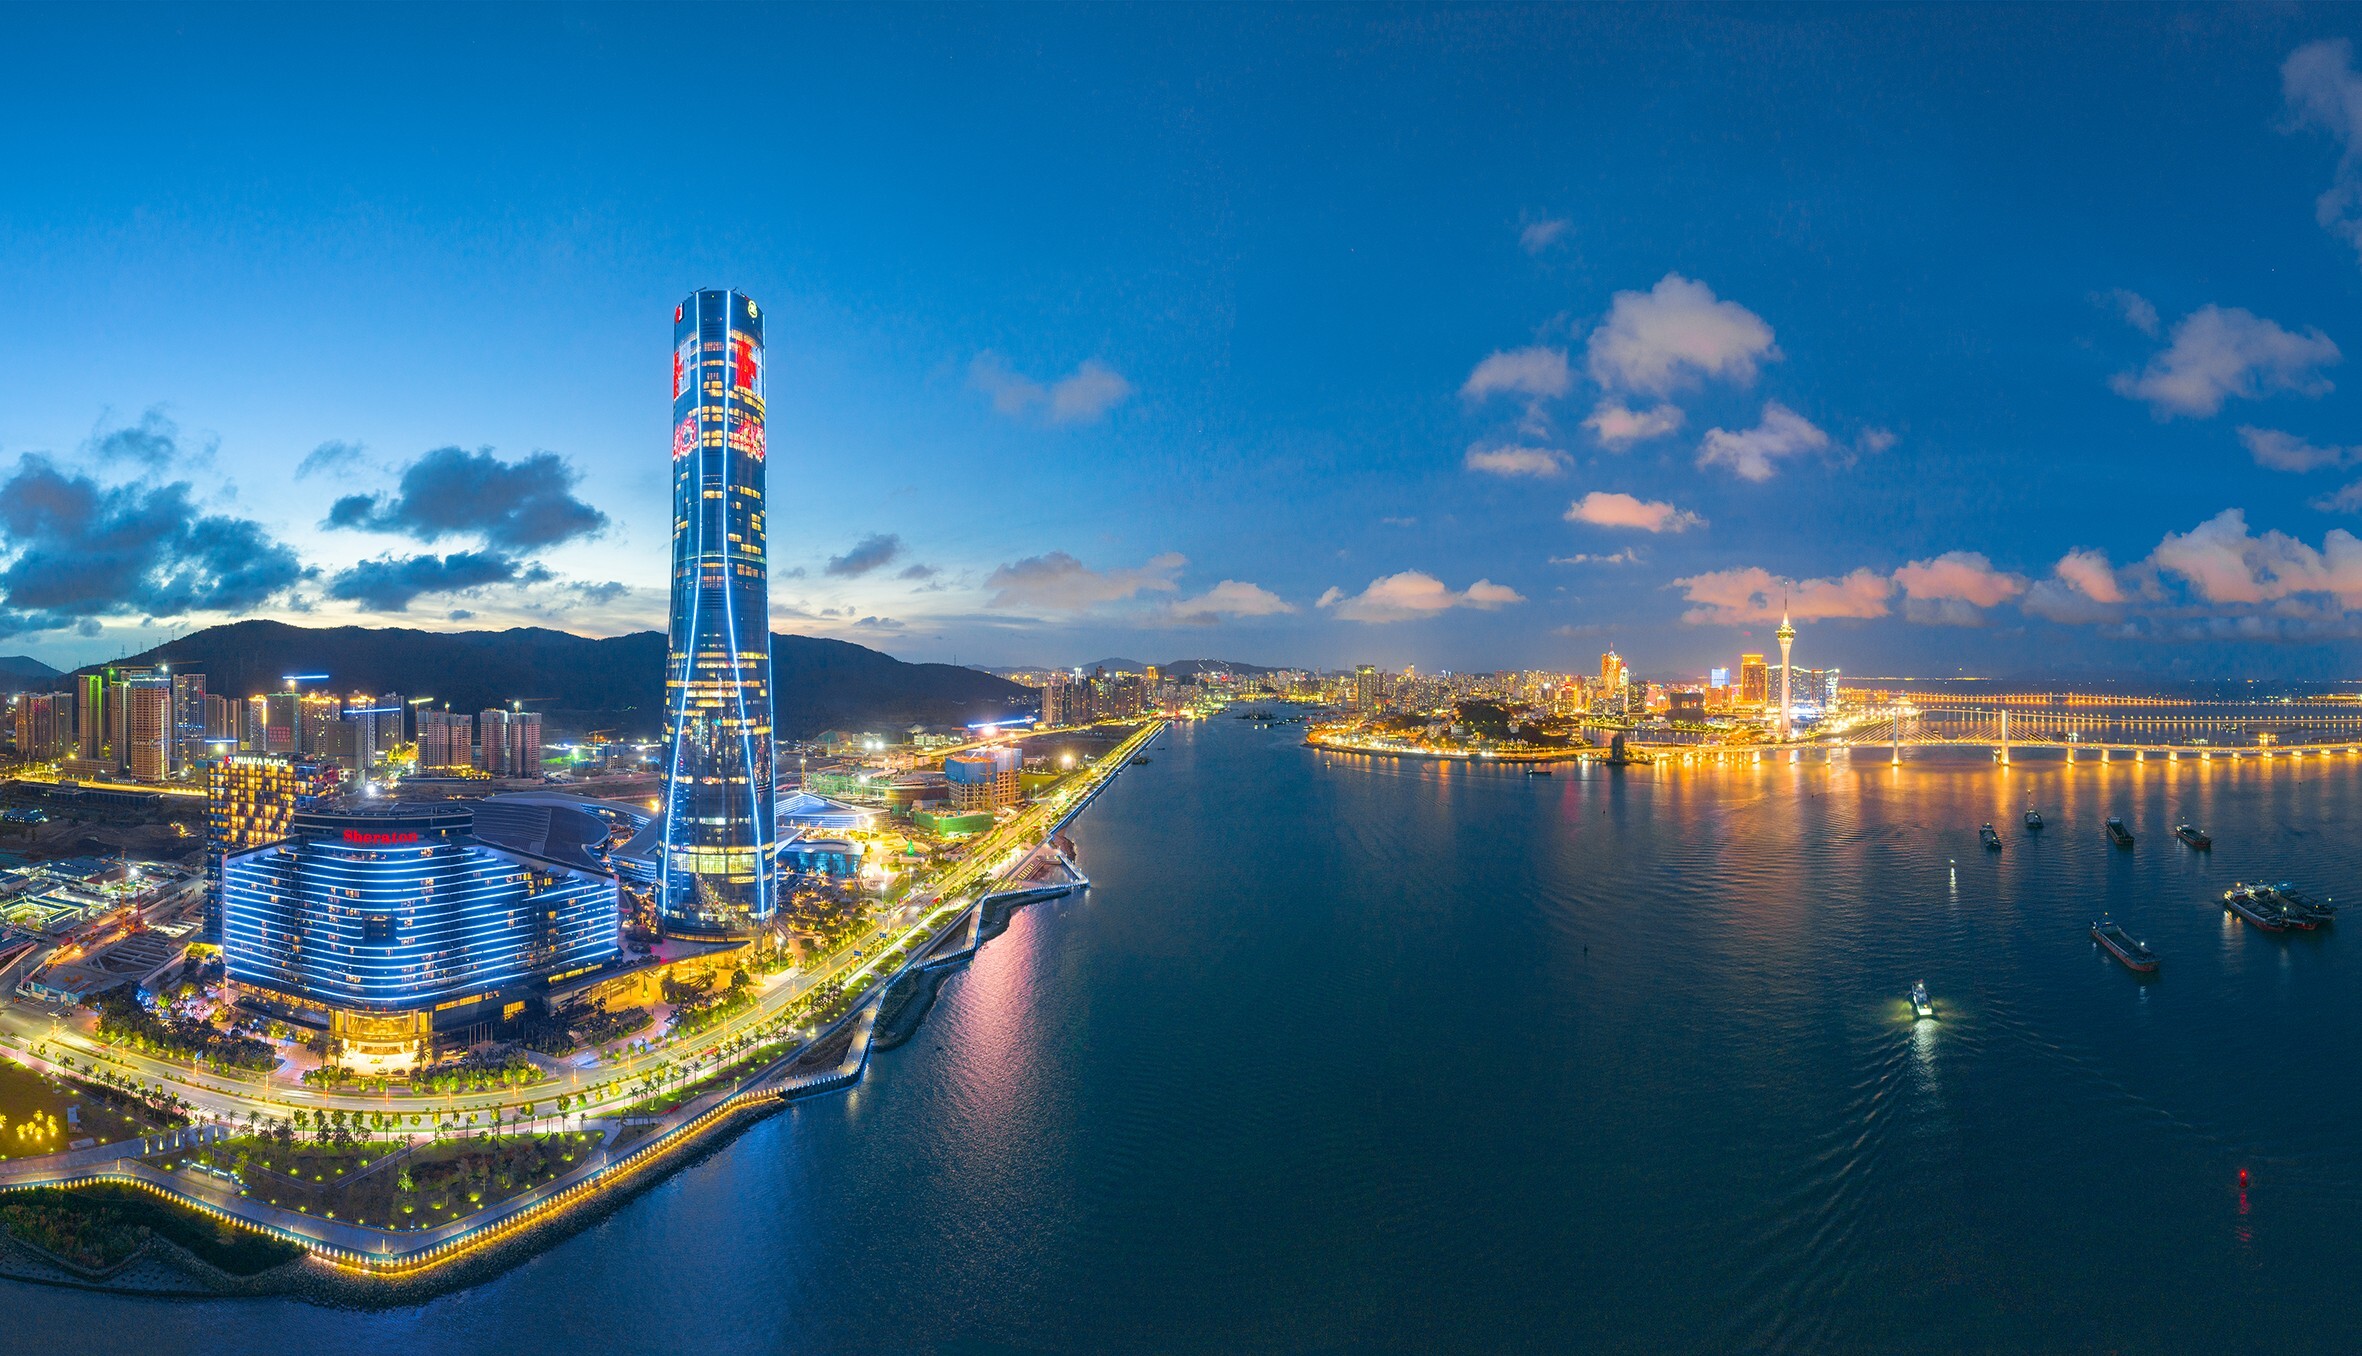 The high premium and large sum show Coli has confidence in Zhuhai’s development, according to an analyst. Photo: Shutterstock